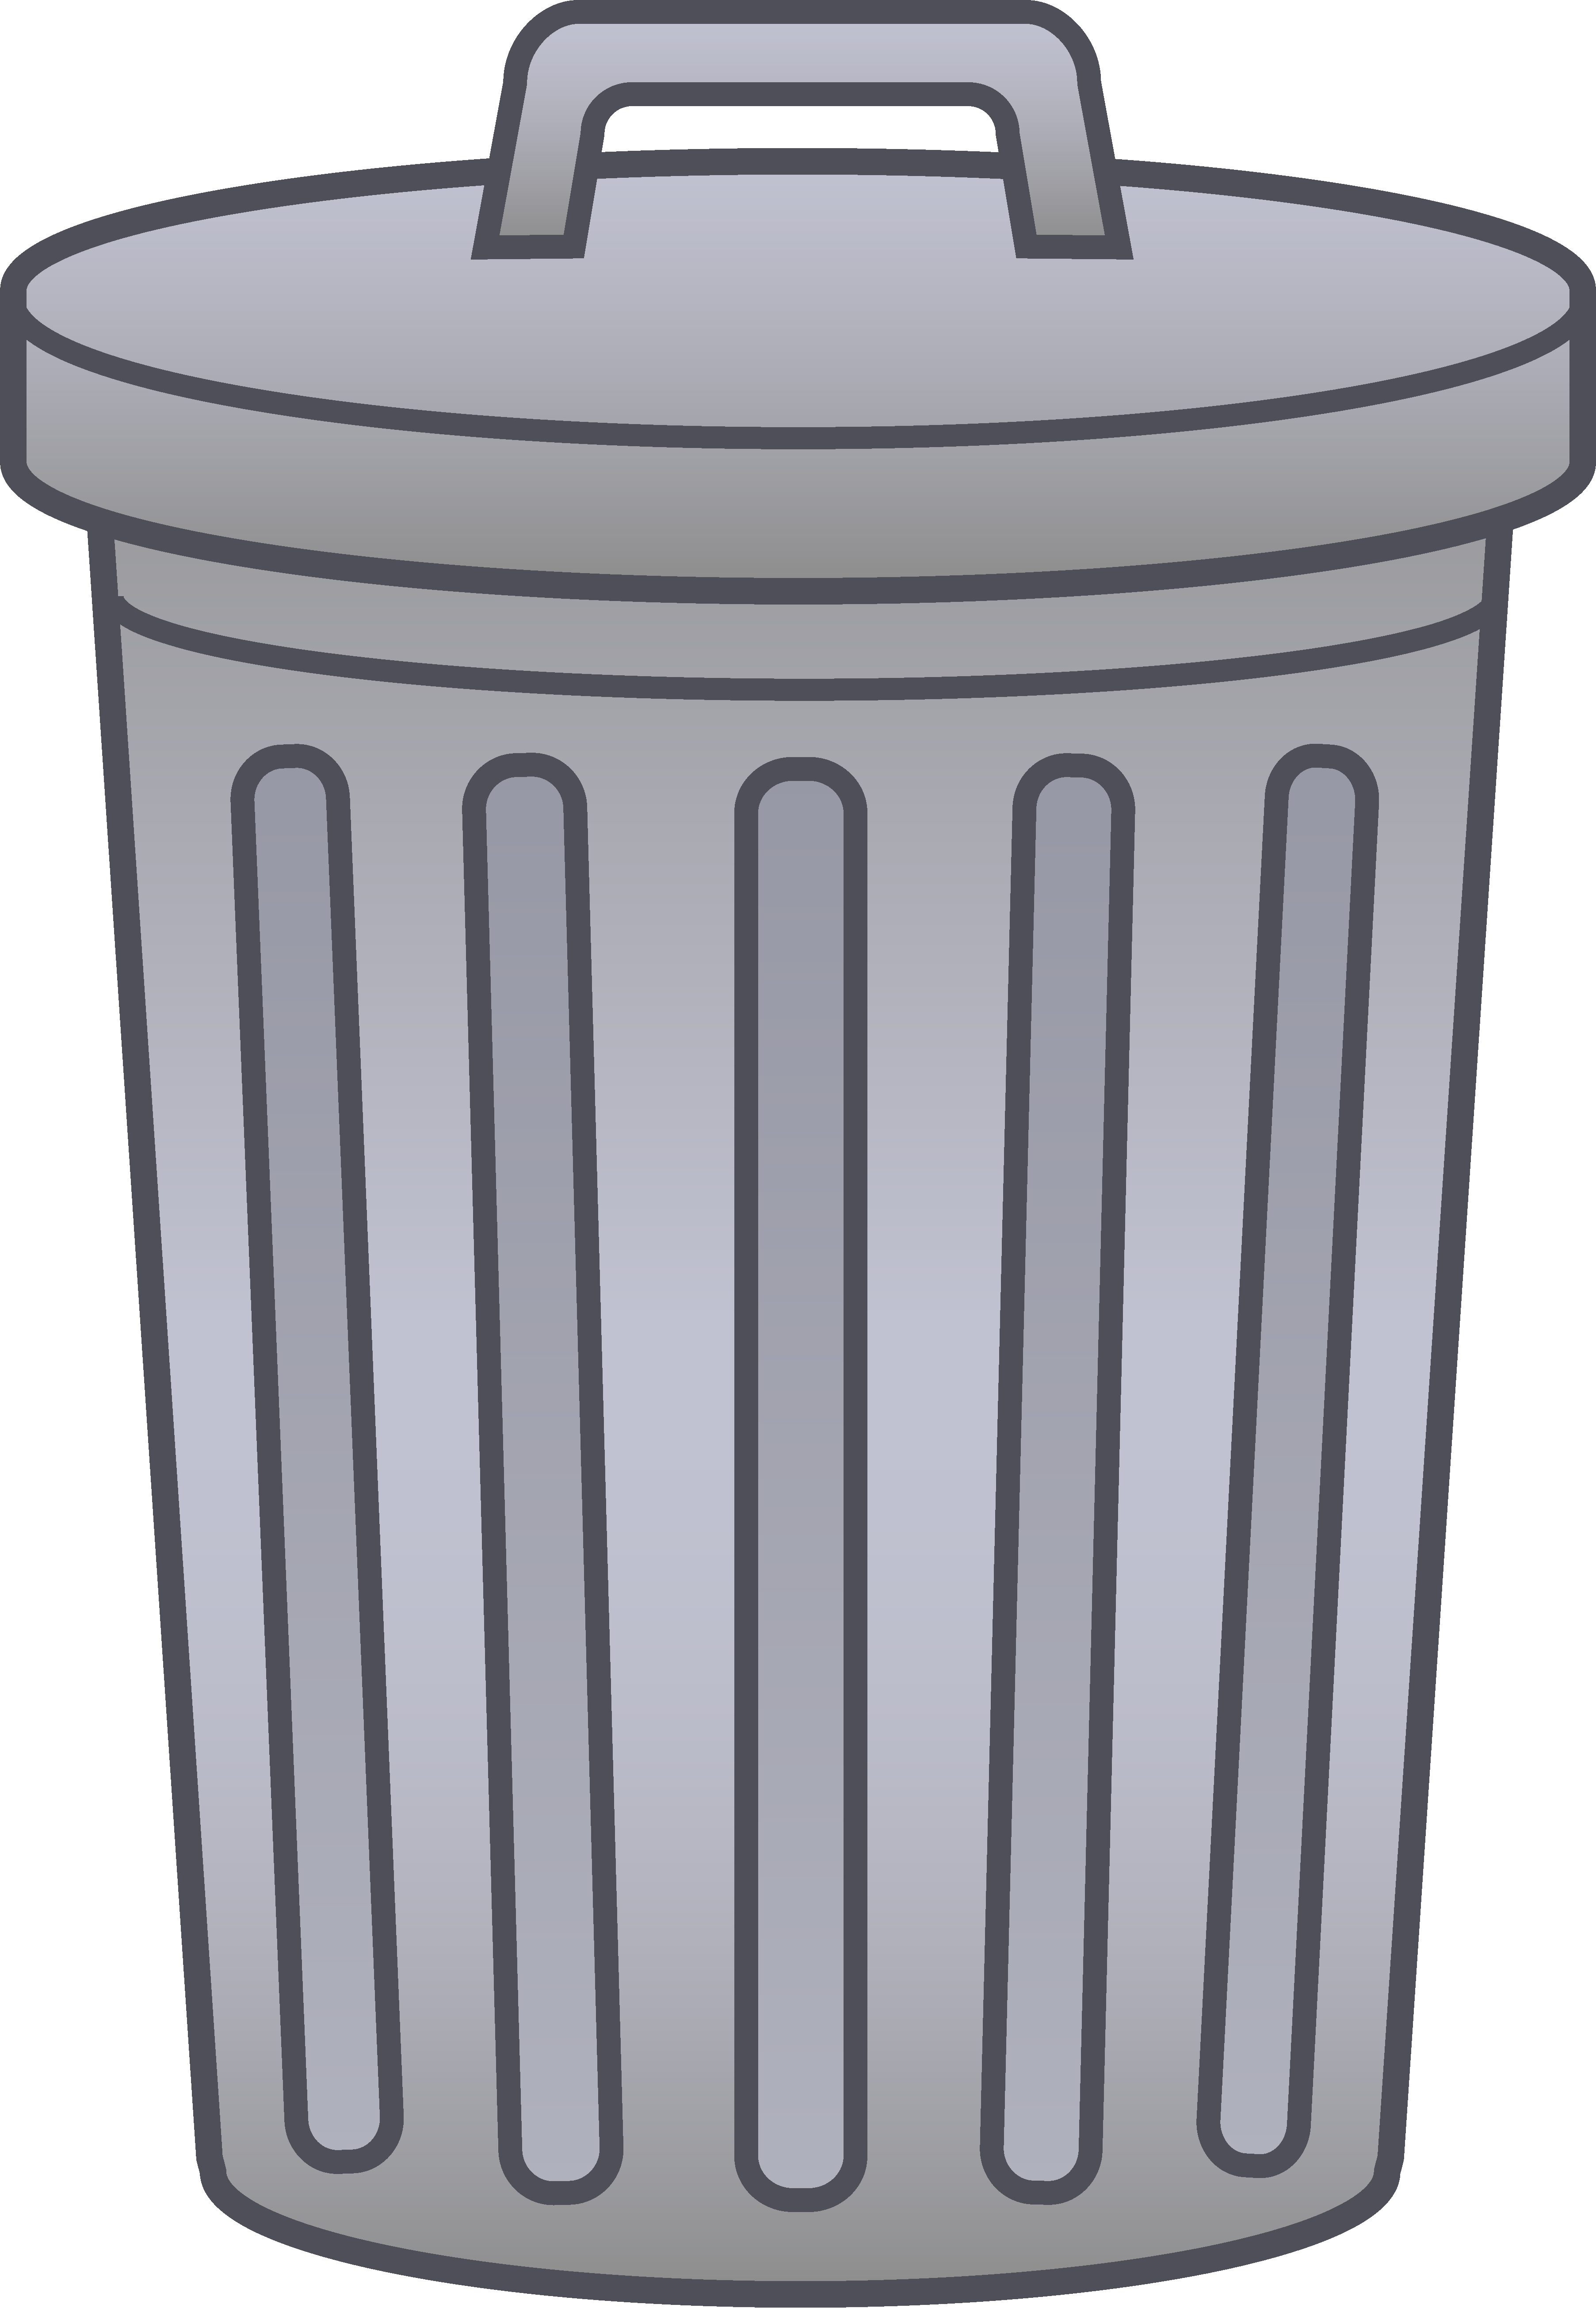 Free Pictures Of Garbage Cans, Download Free Pictures Of Garbage Cans